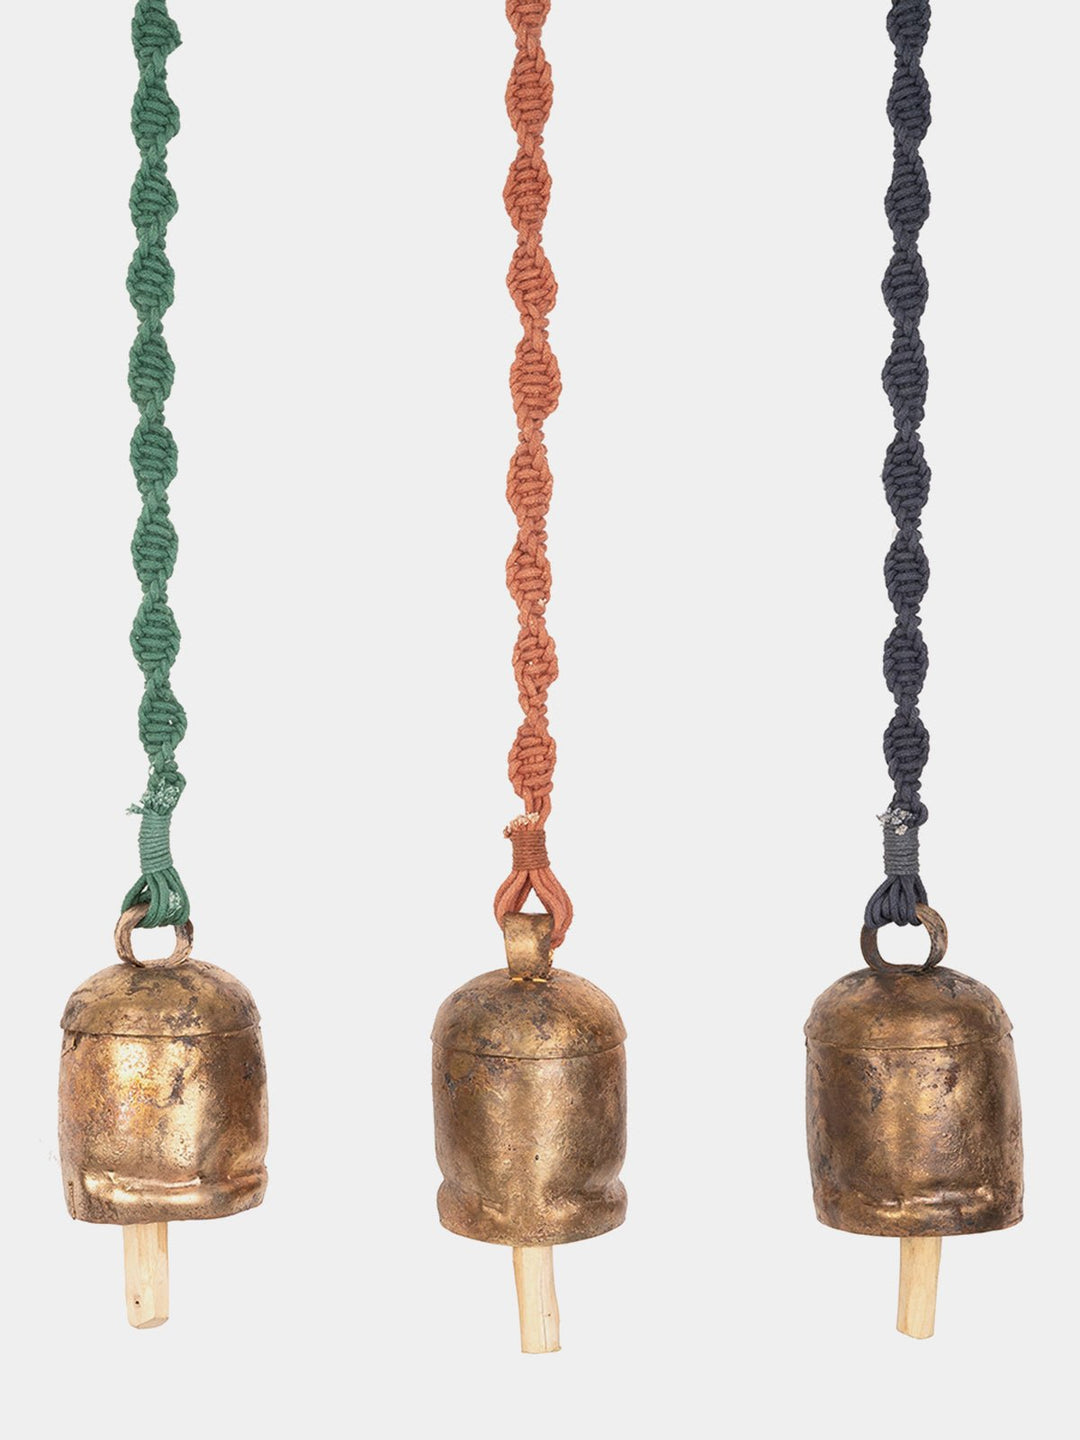 Home DecorMeander Hand-Knotted Wind Chime with Metal BellOne 'O' Eight Knots